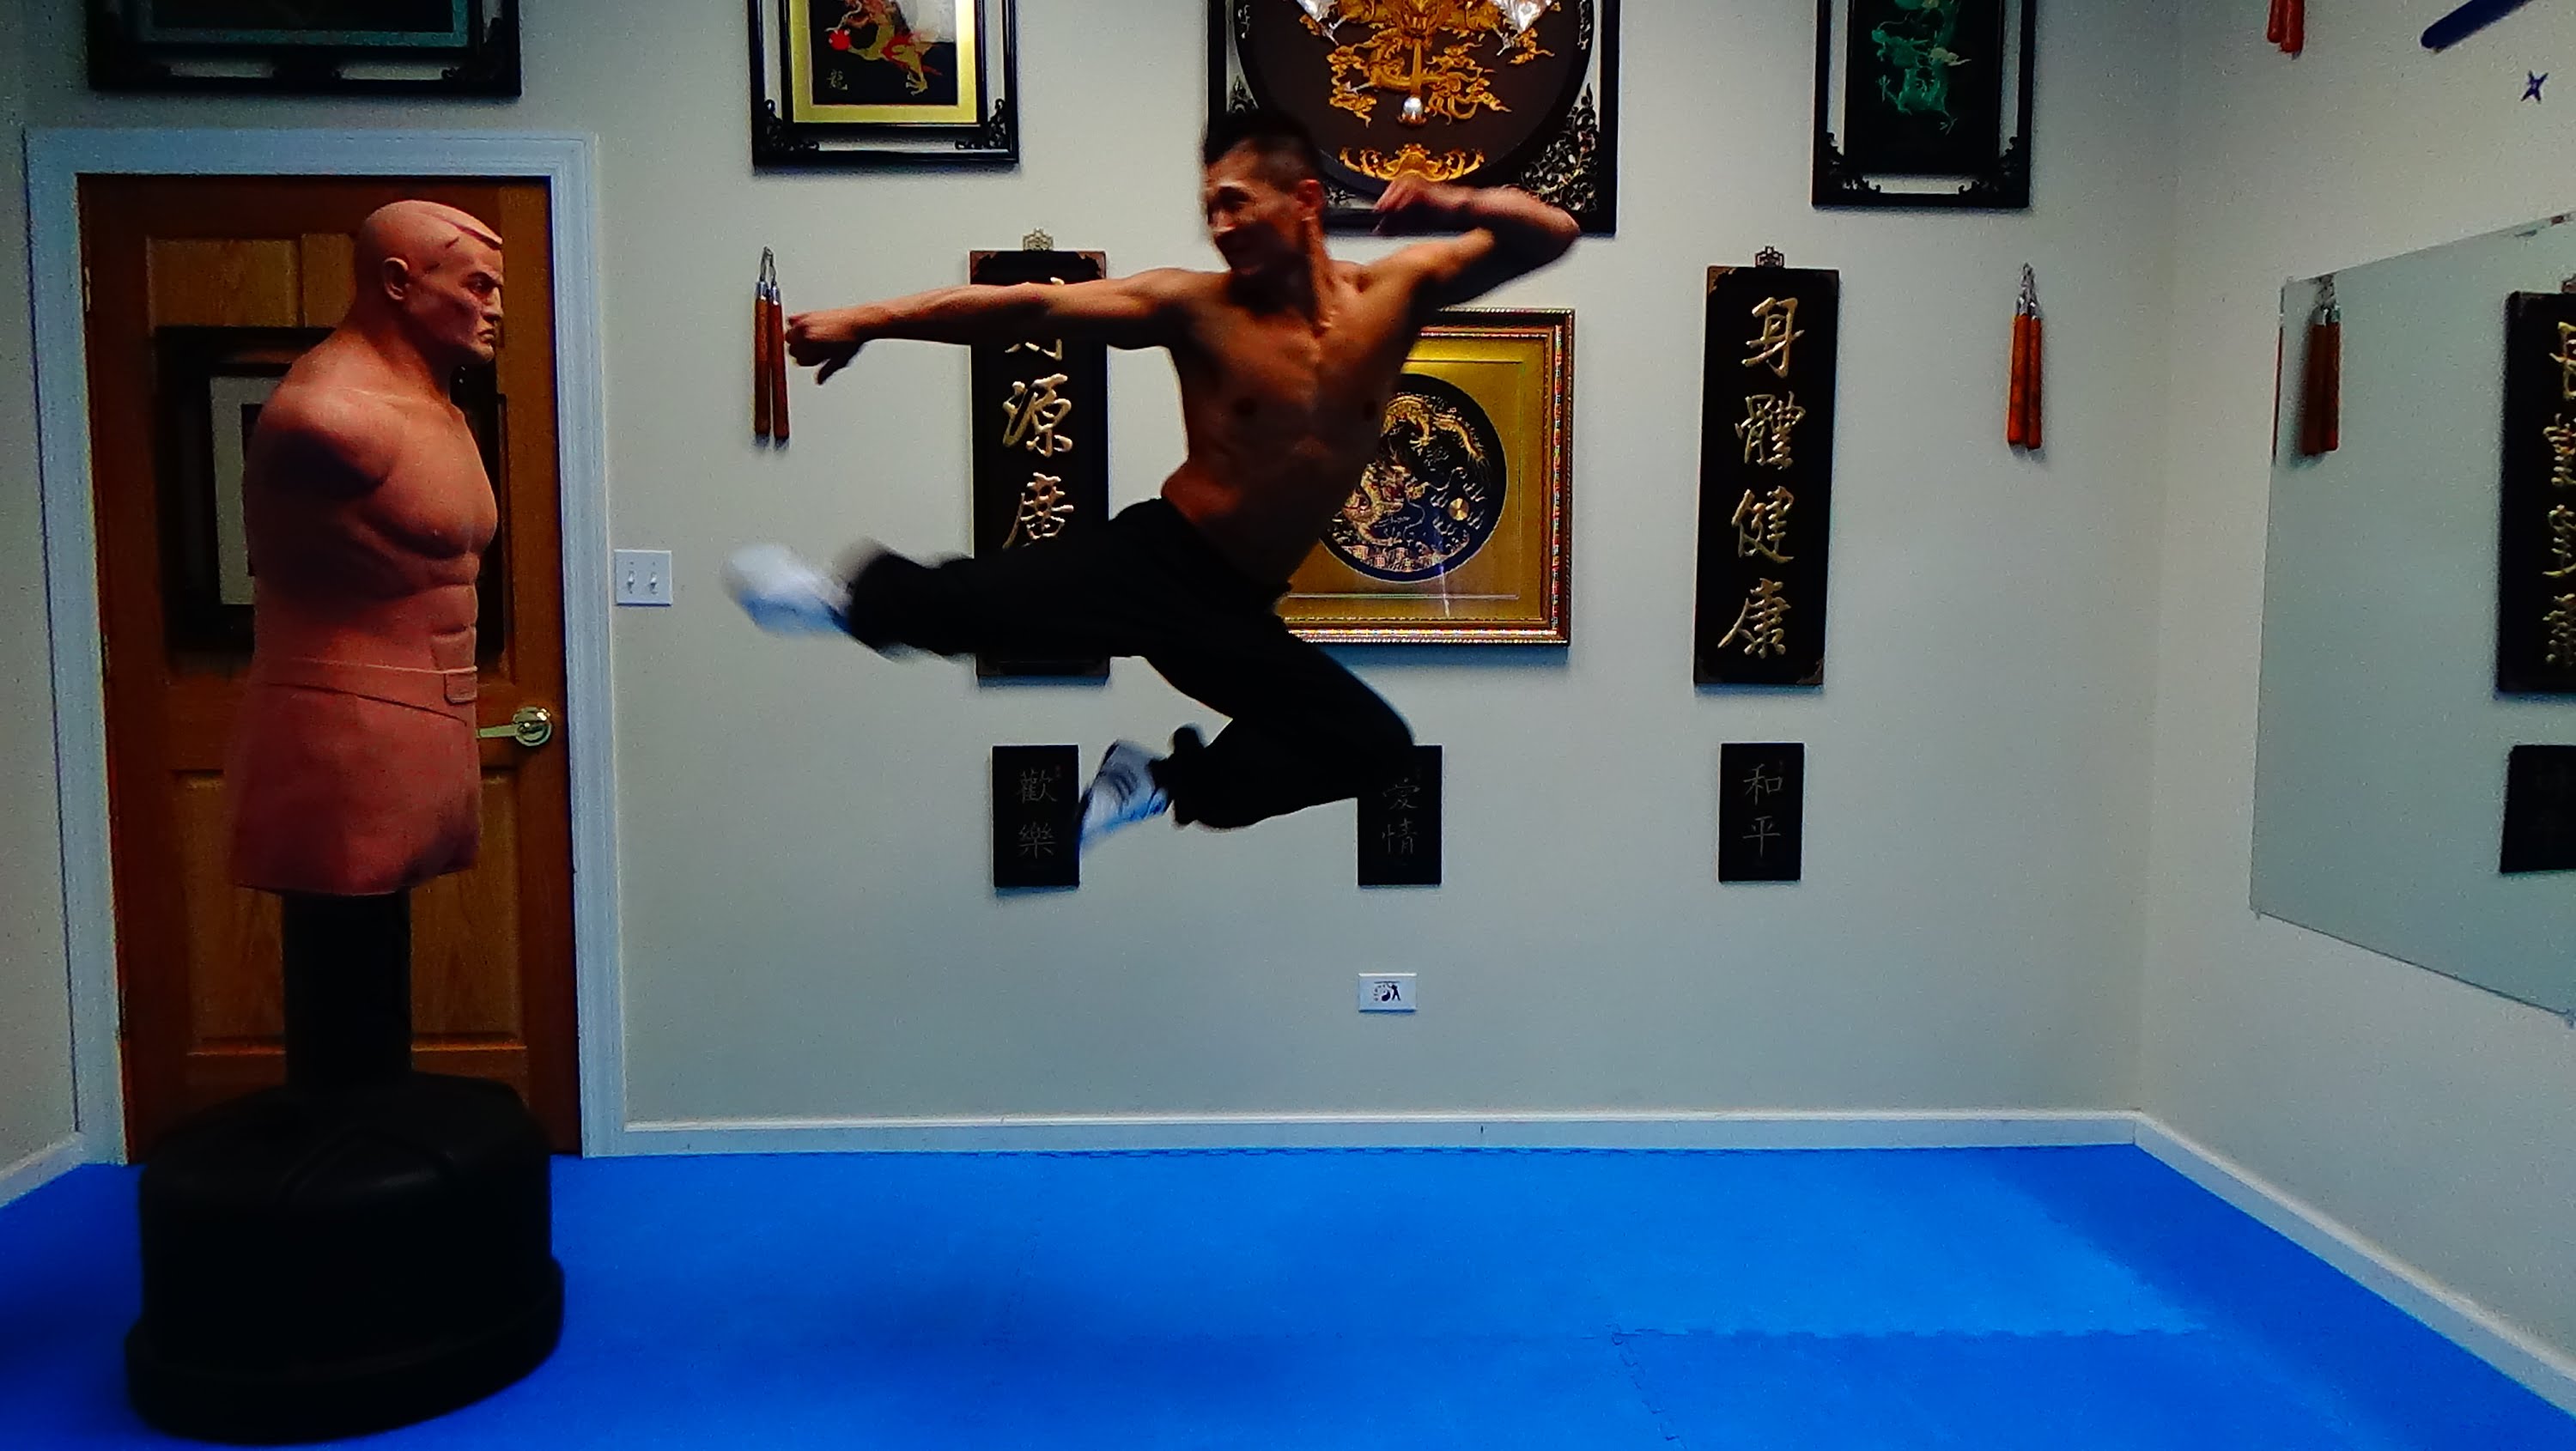 Basic Tips For Martial Arts At Home - How To Learn Basic Martial Arts